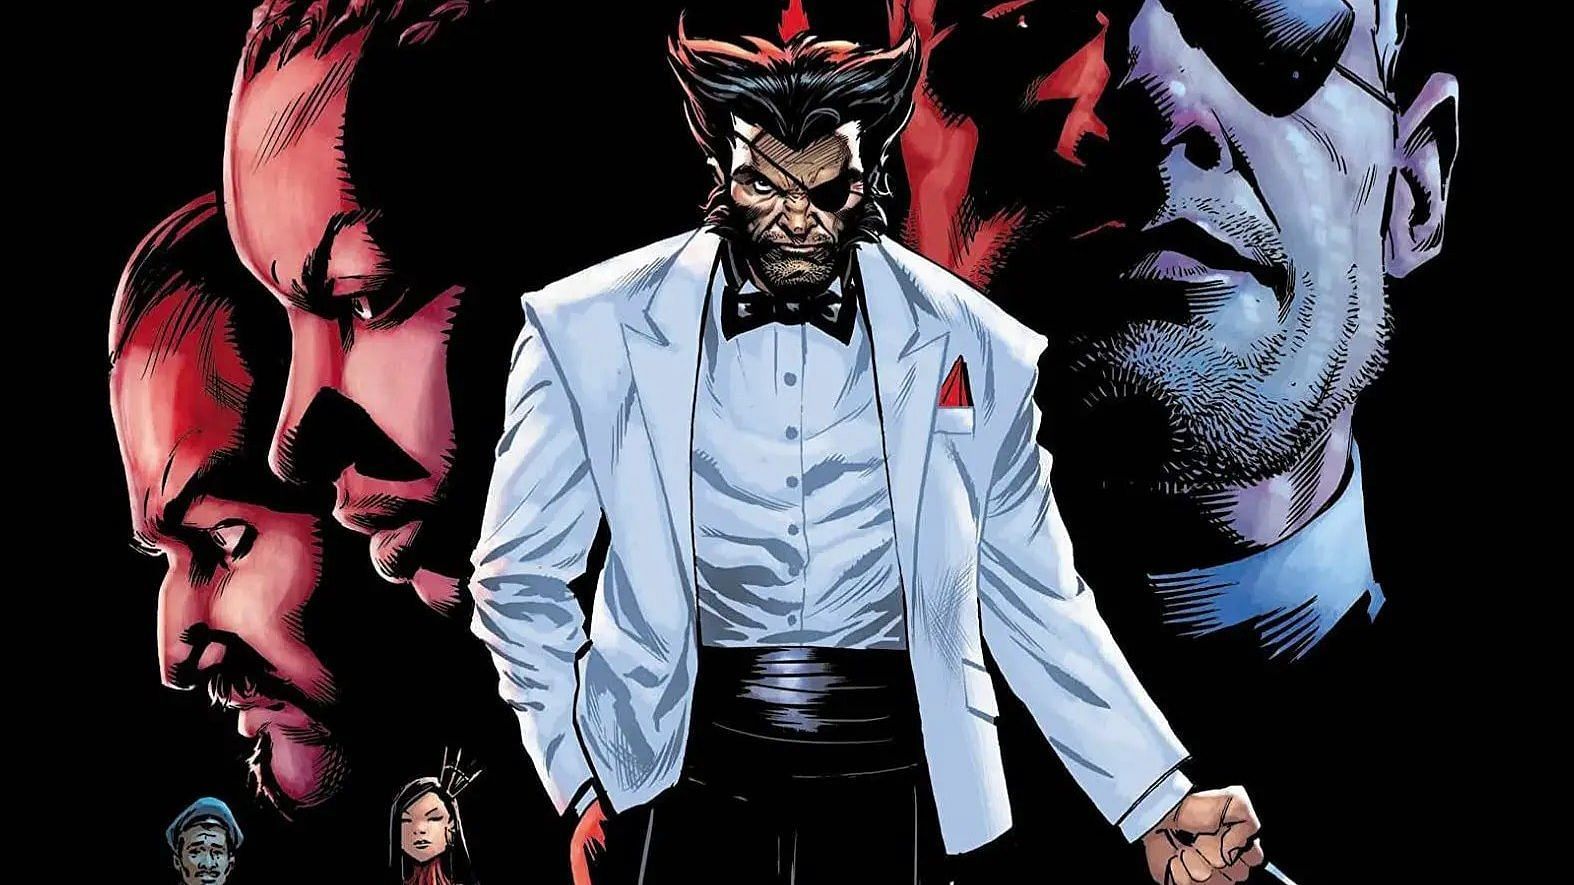 Wolverine as Patch in comics (Image via Marvel Comics)